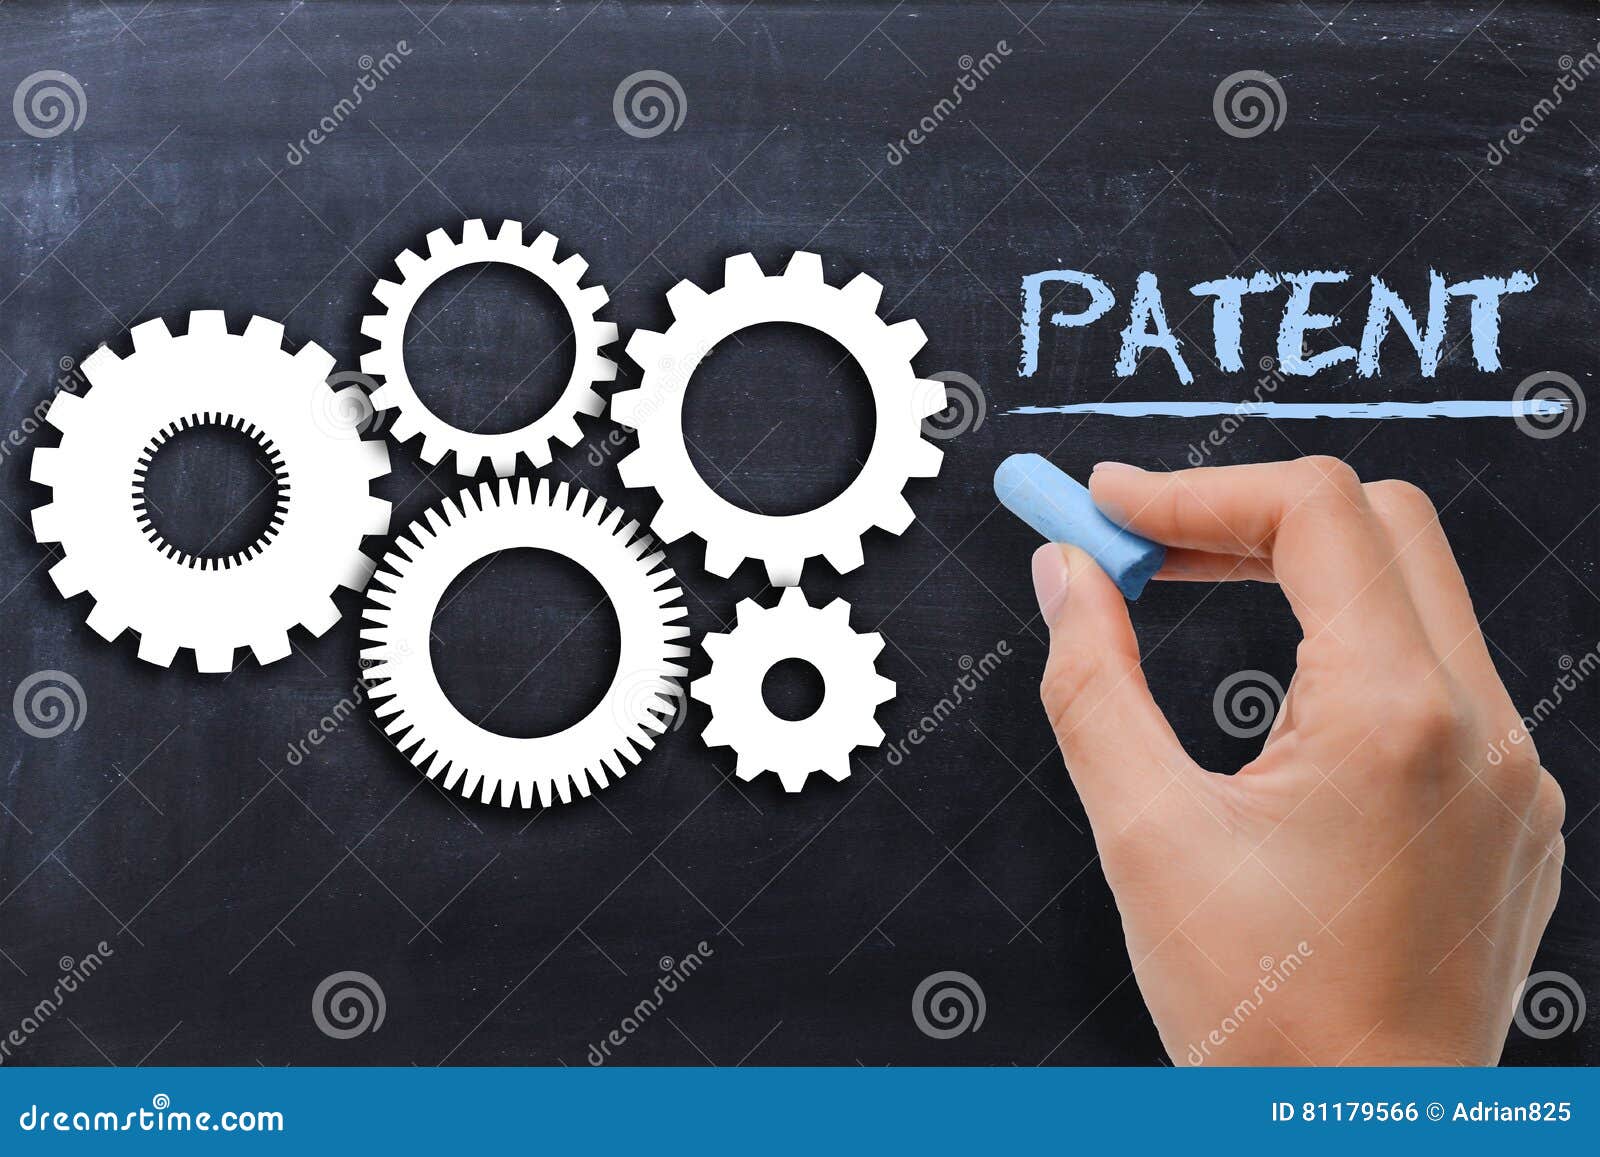 industrial patent protection concept with gears on blackboard